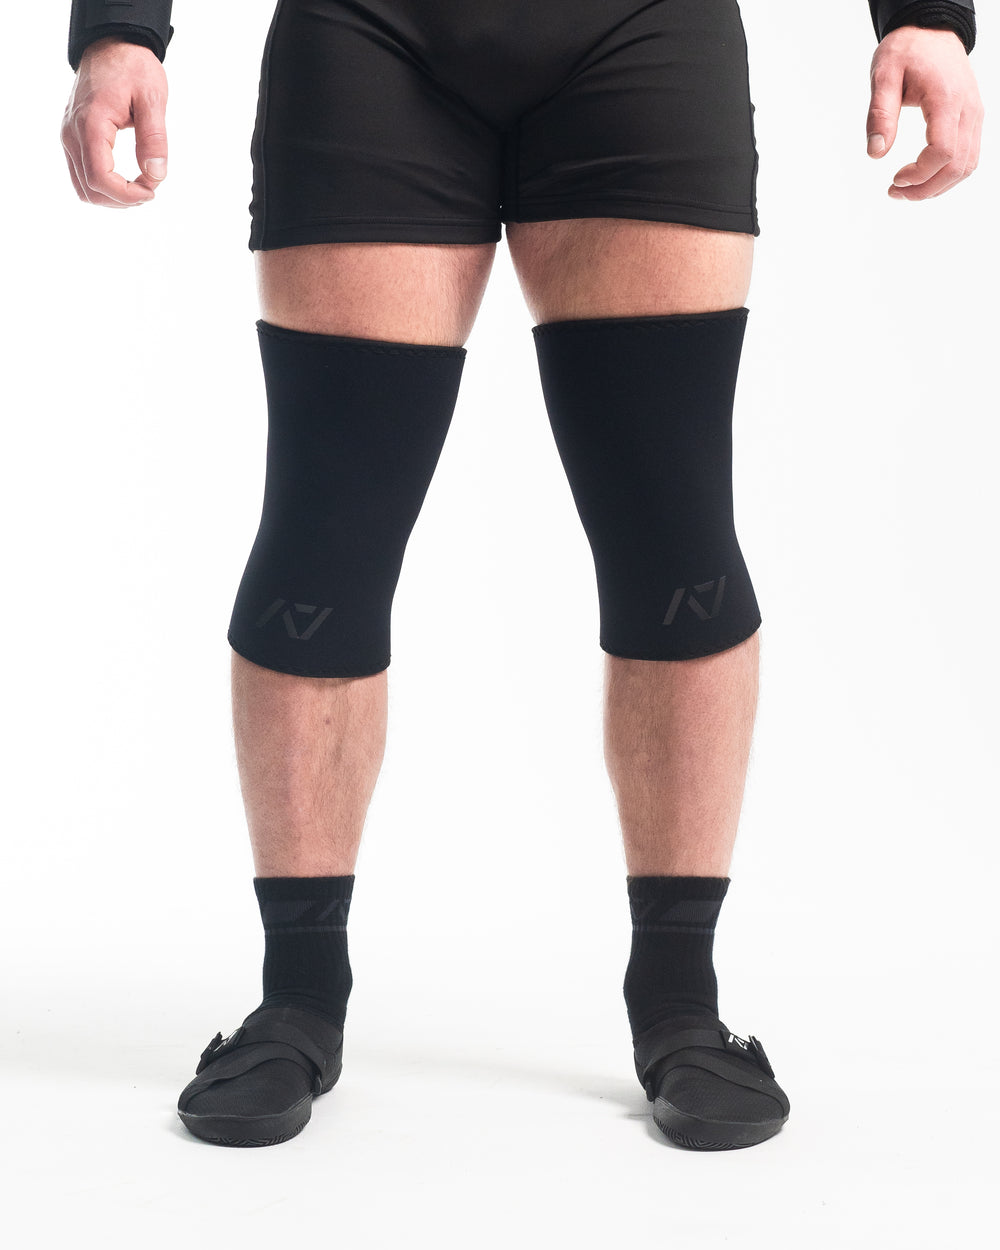 Hourglass Knee Sleeves   Stealth   A7